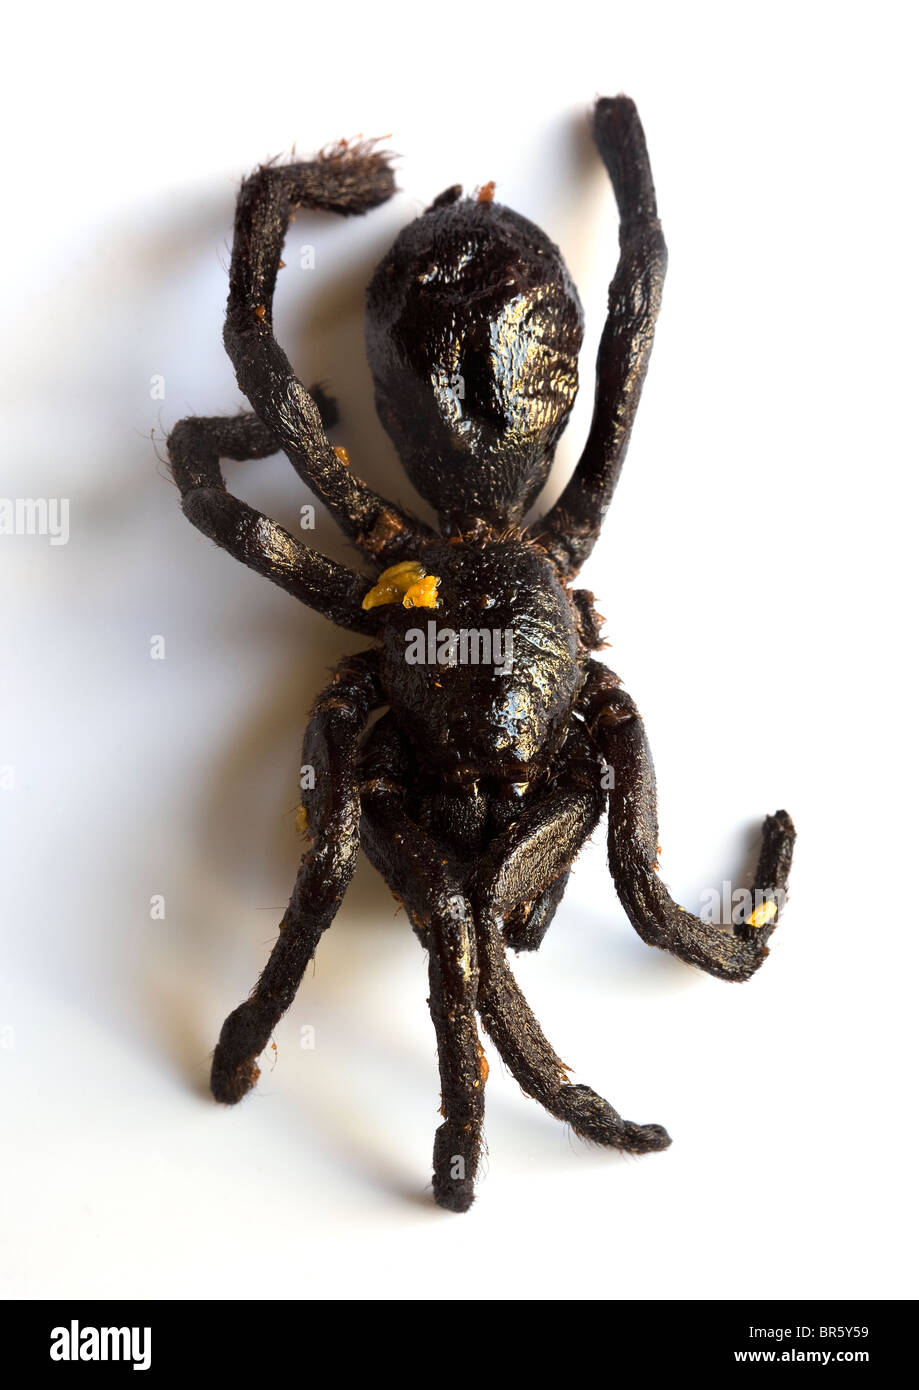 Fried Tarantula Spider as sold as streetfood in Cambodia - An example of the strange or weird food eaten by people around the world Stock Photo